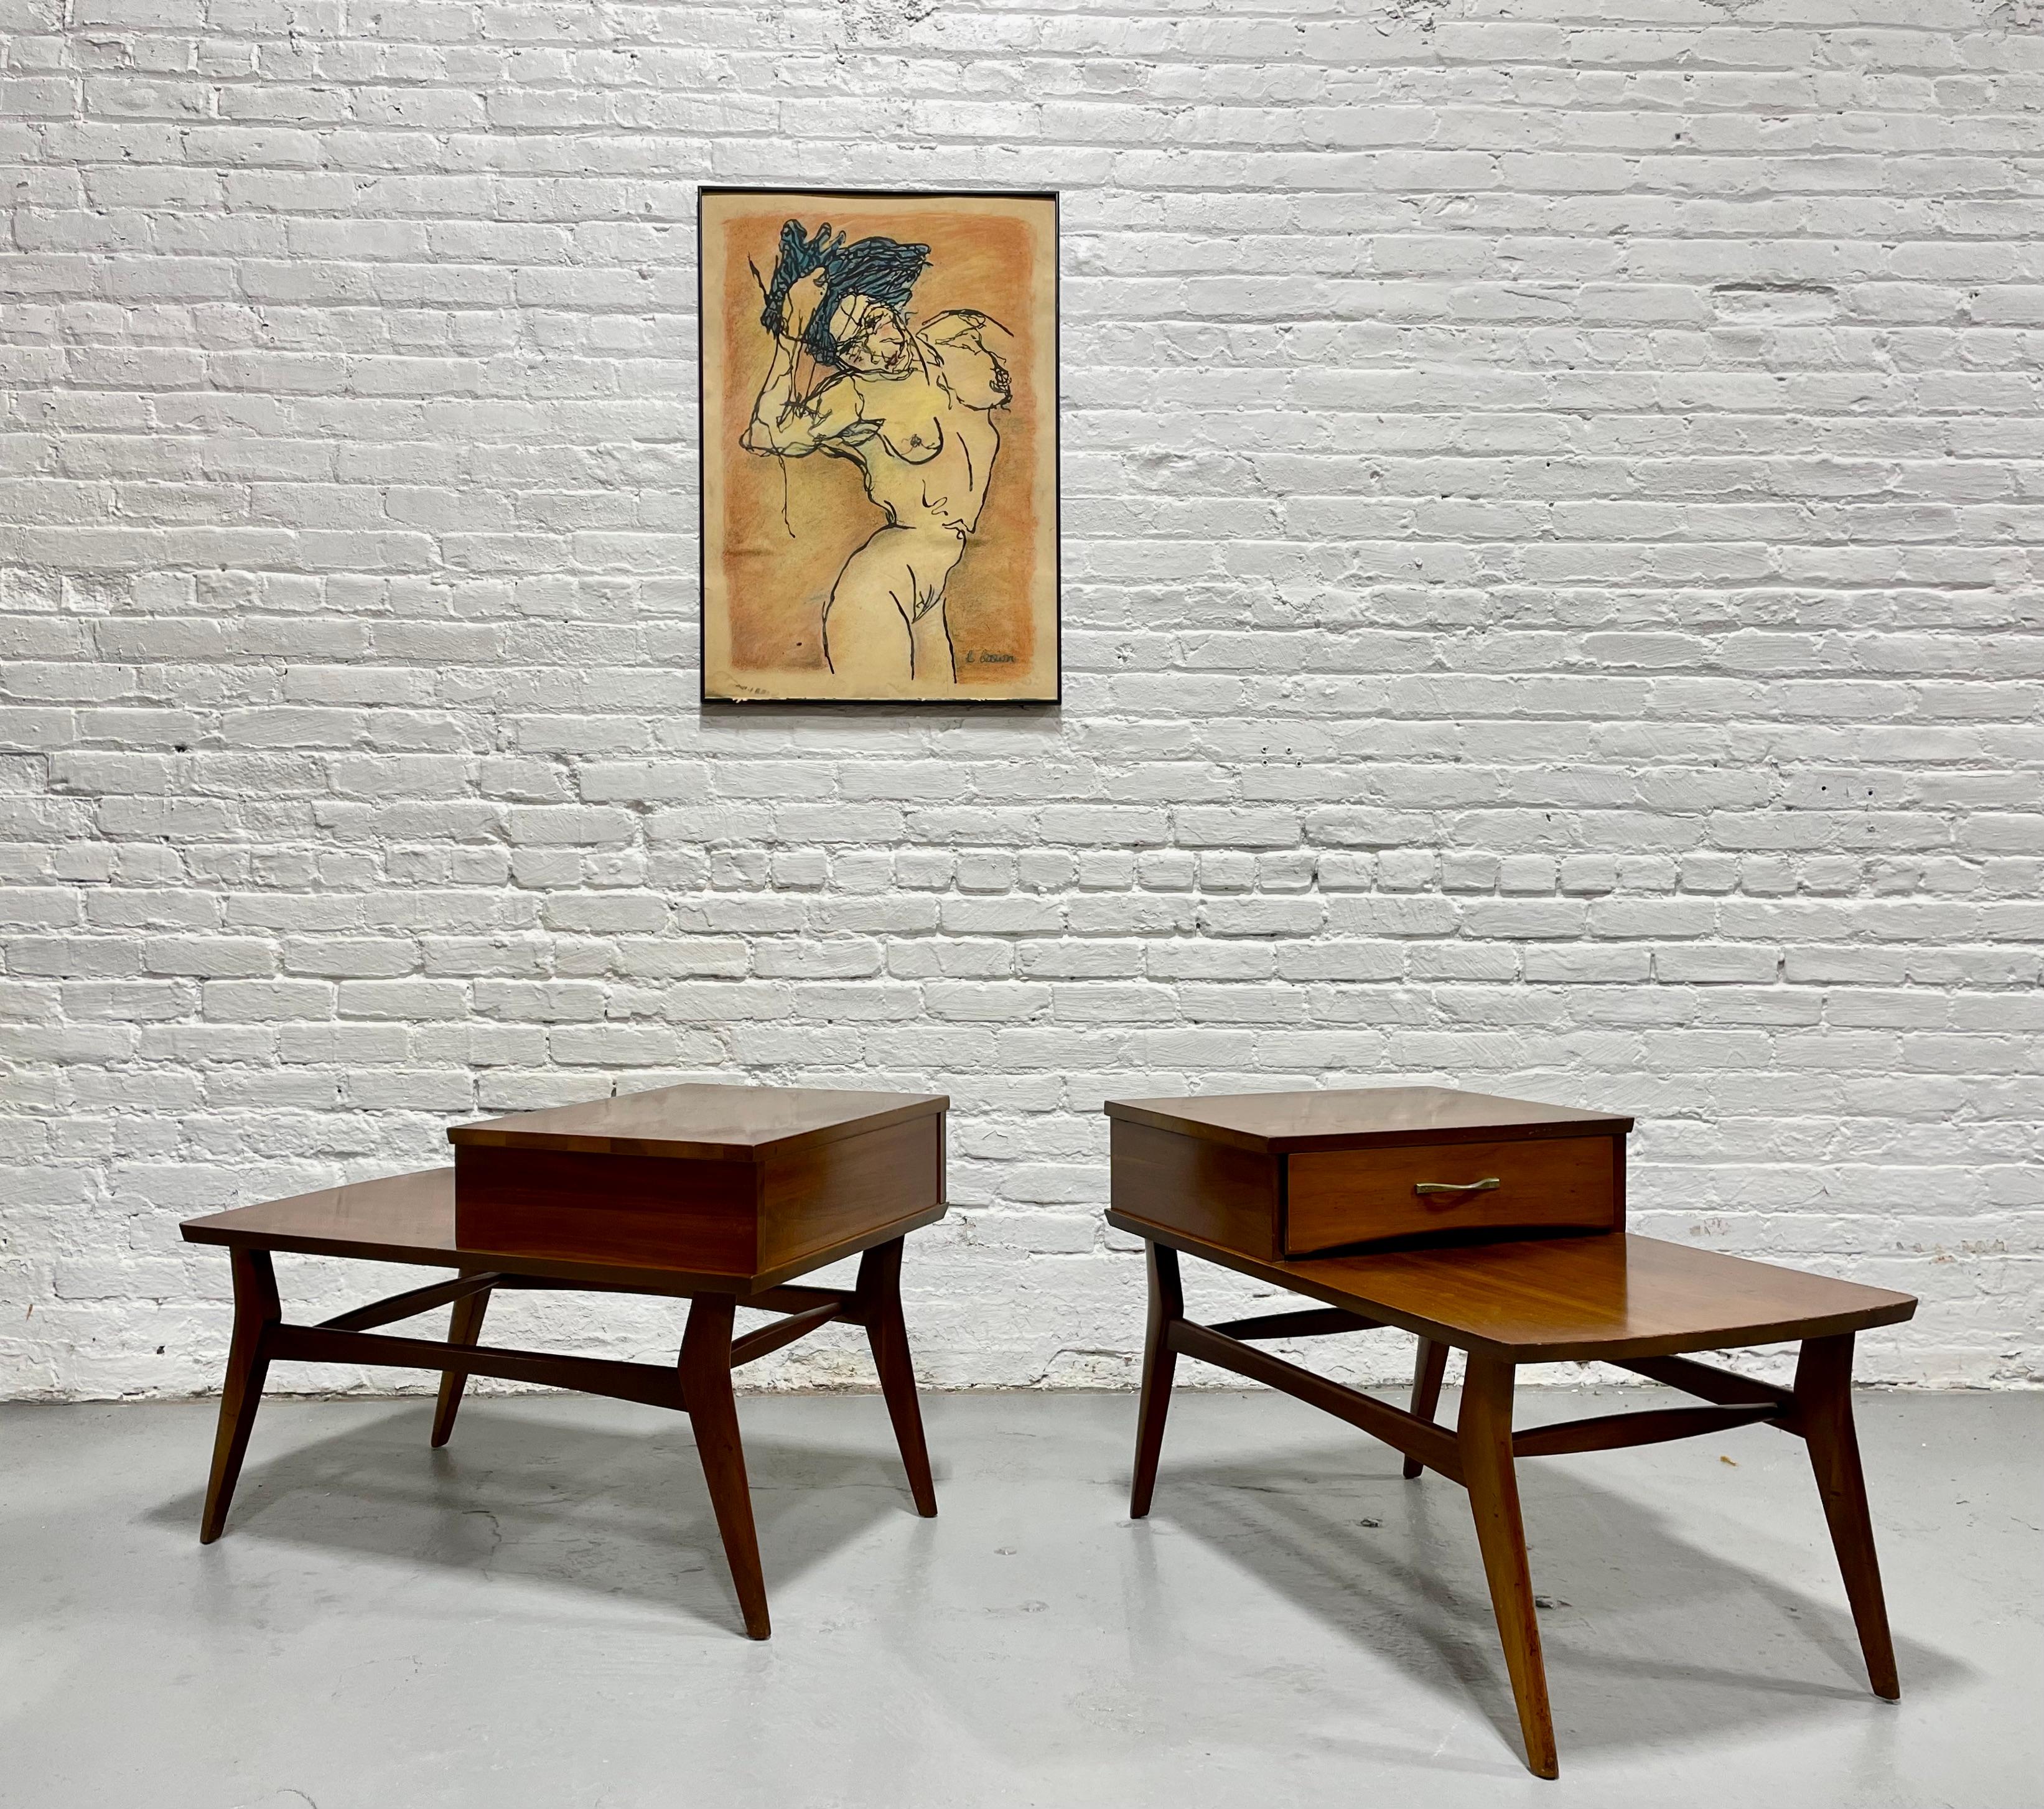 Mid Century Modern Solid Walnut Tiered End Tables by Mersman, c. 1960’s. This solid pair feature incredible wood grains with glorious coloring and tone. Plenty of tabletop space on the upper and lower levels to display magazines, books and even a